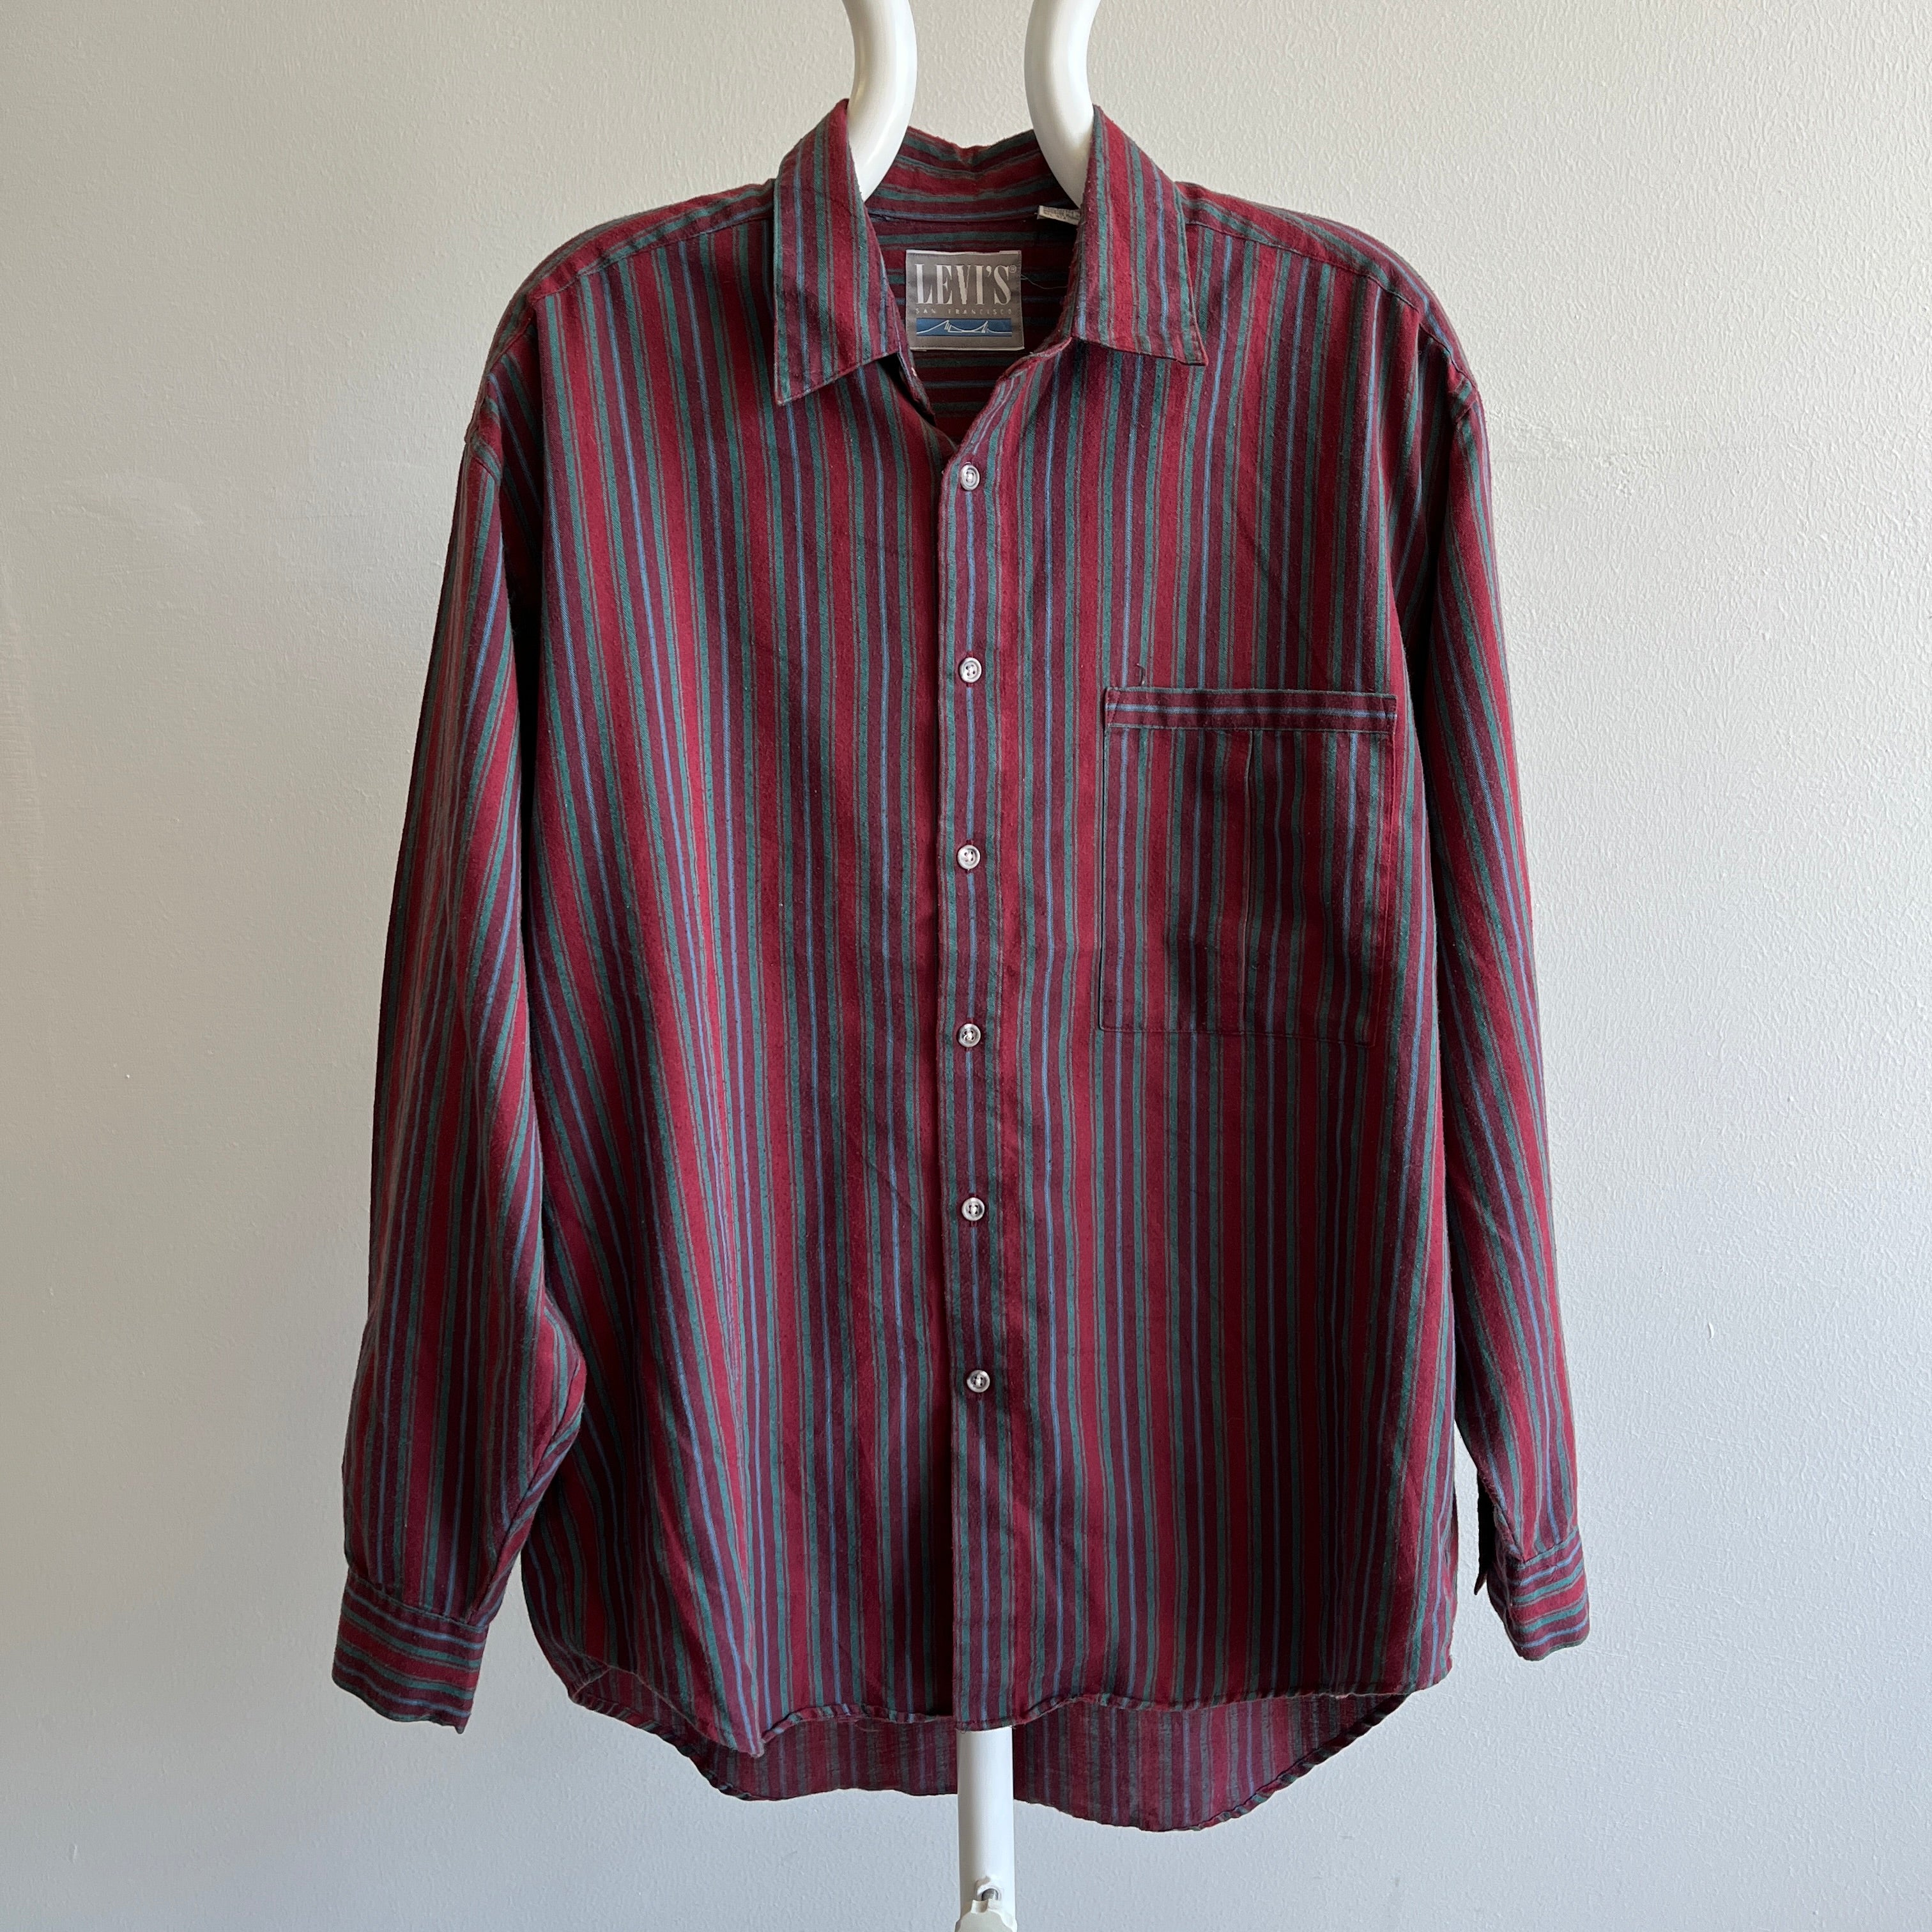 1990s Levi's Striped Single Pocket Shirt with Buttons